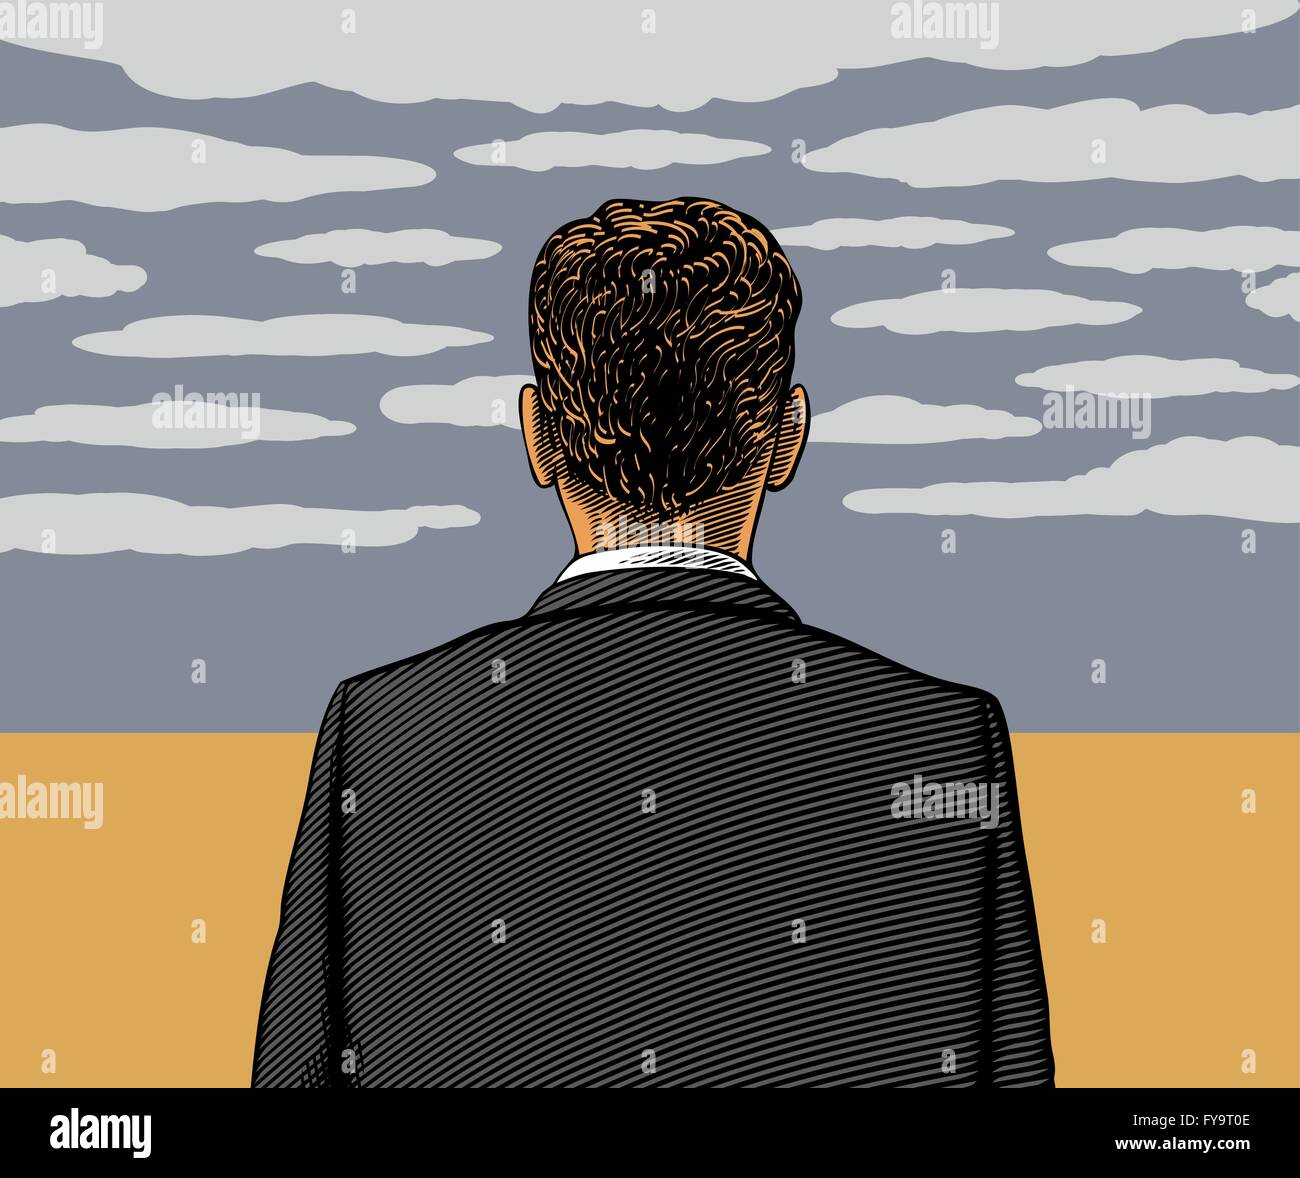 Vector illustration of lonely man with cloudy sky Stock Vector